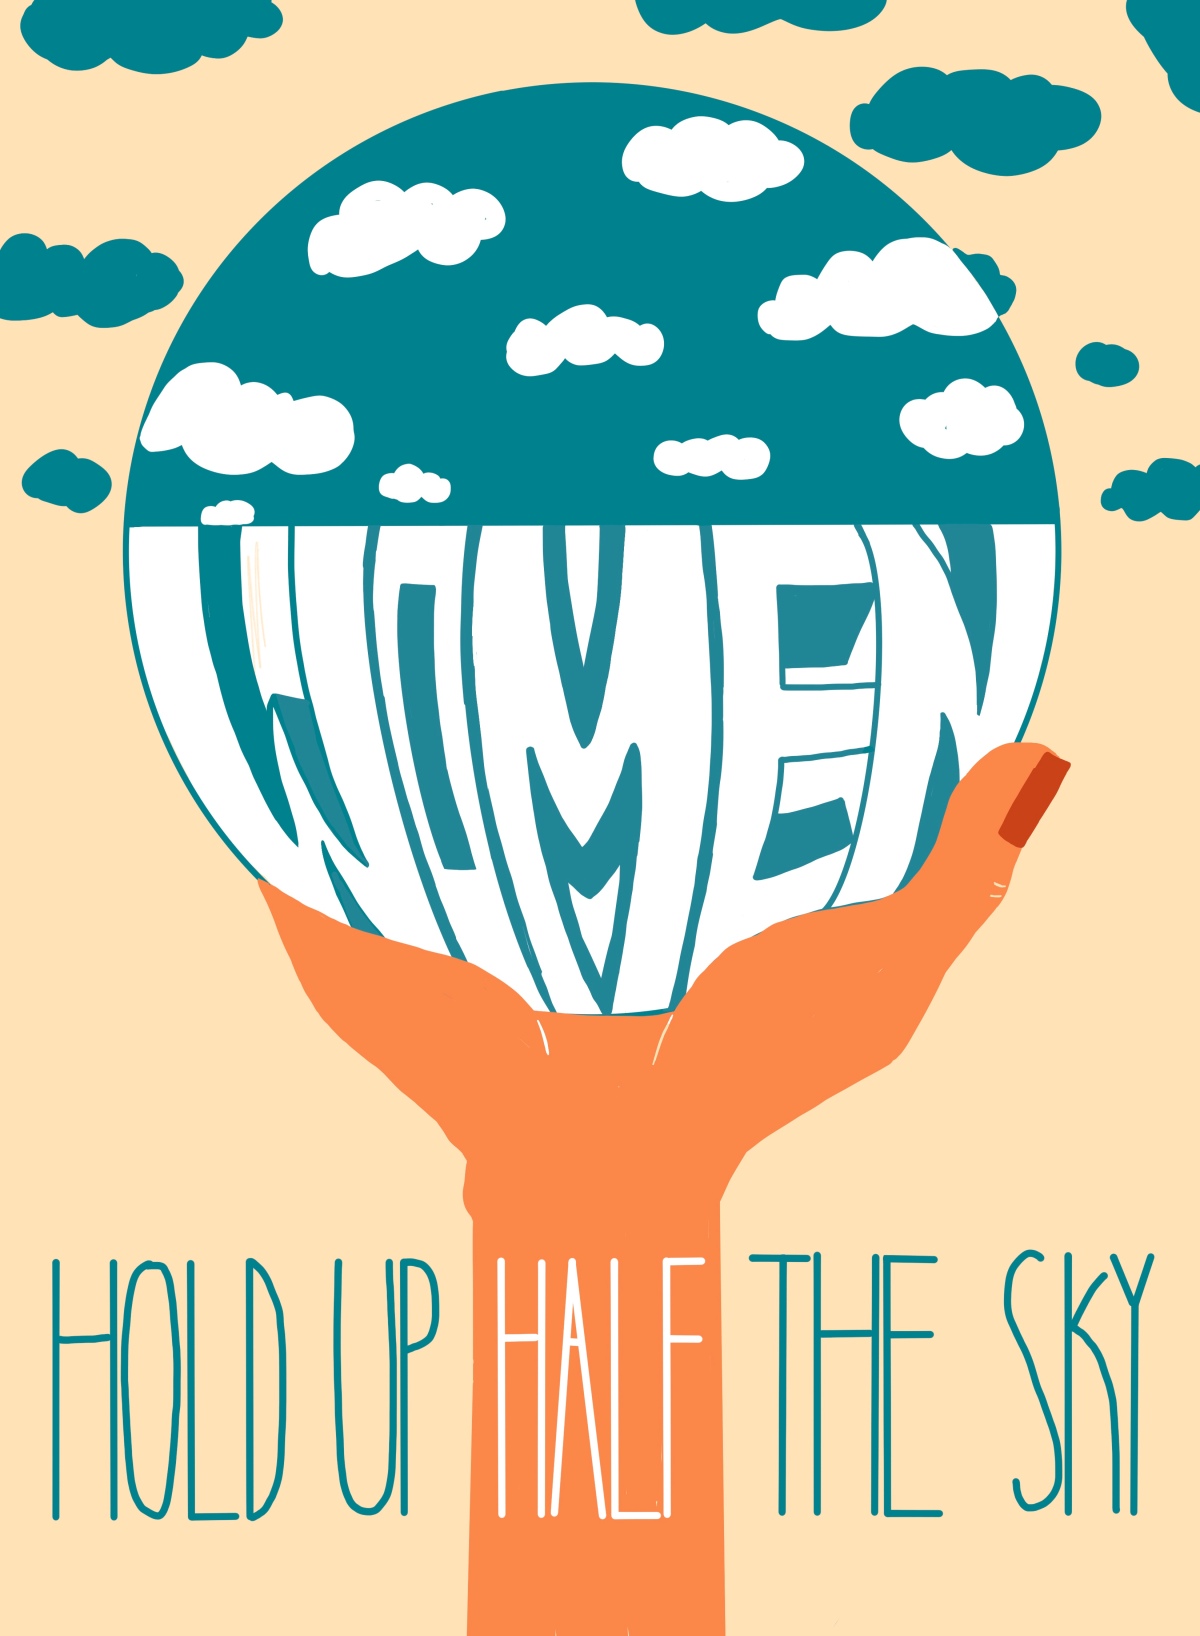 Women hold up half the sky